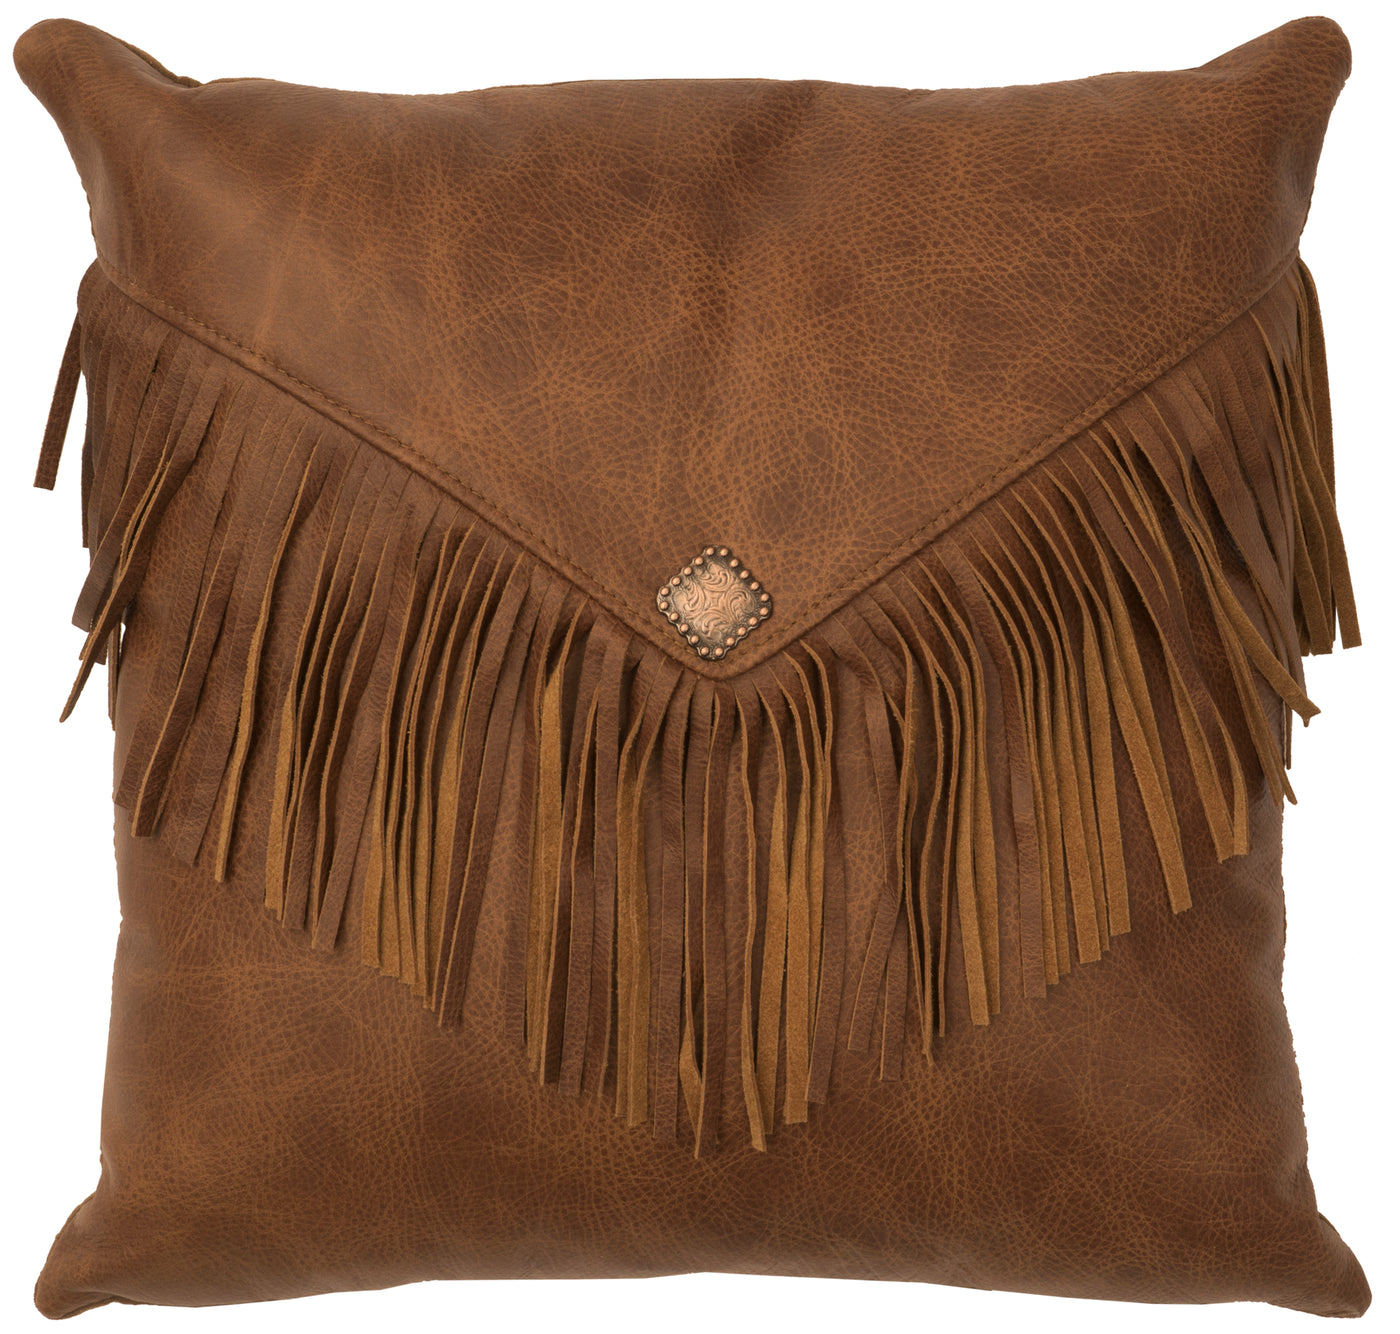 Canvello Whiskey Leather Pillow - Leather Back - 16" x 16"